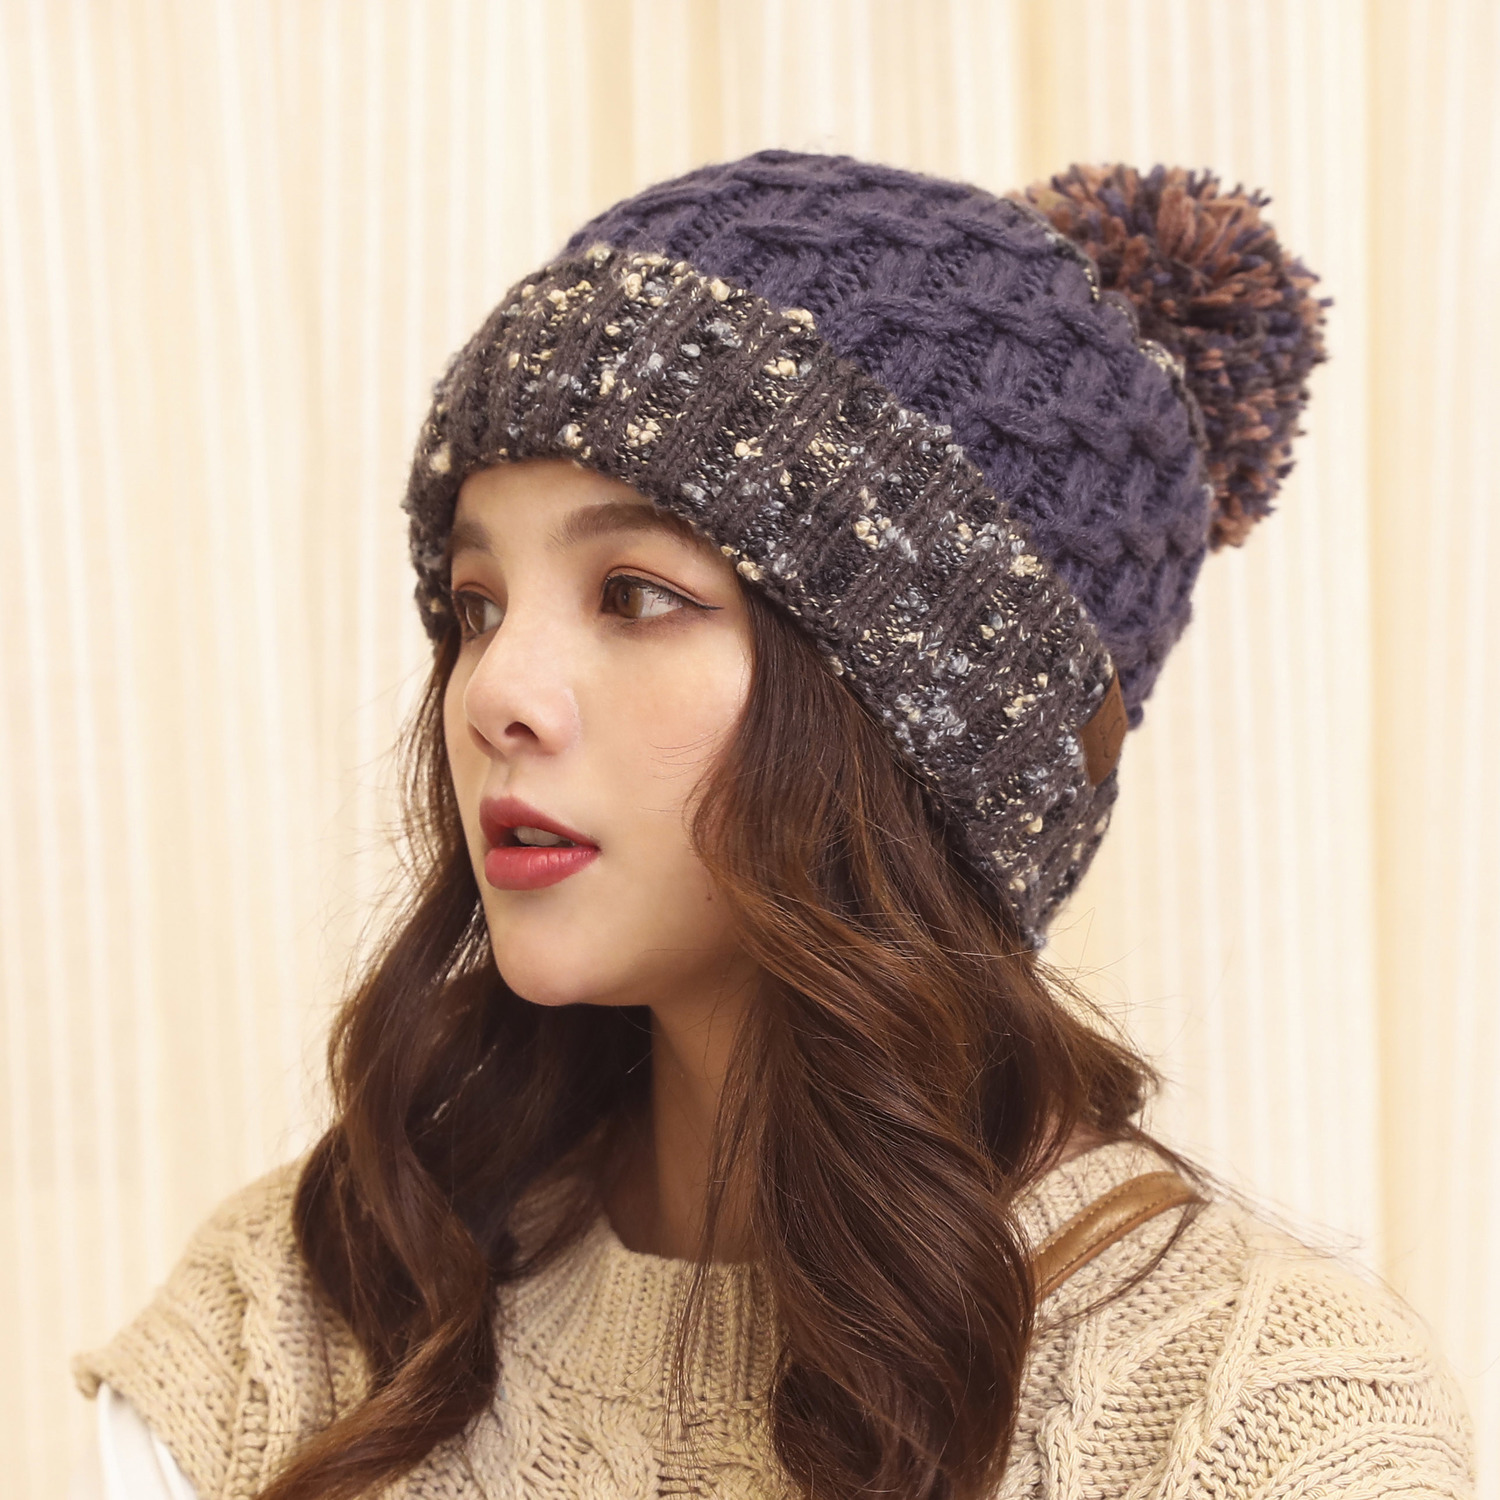 [Plus velvet and thick] Knitted hat women's winter Korean style student autumn and winter women's confinement warm woolen hat with round face